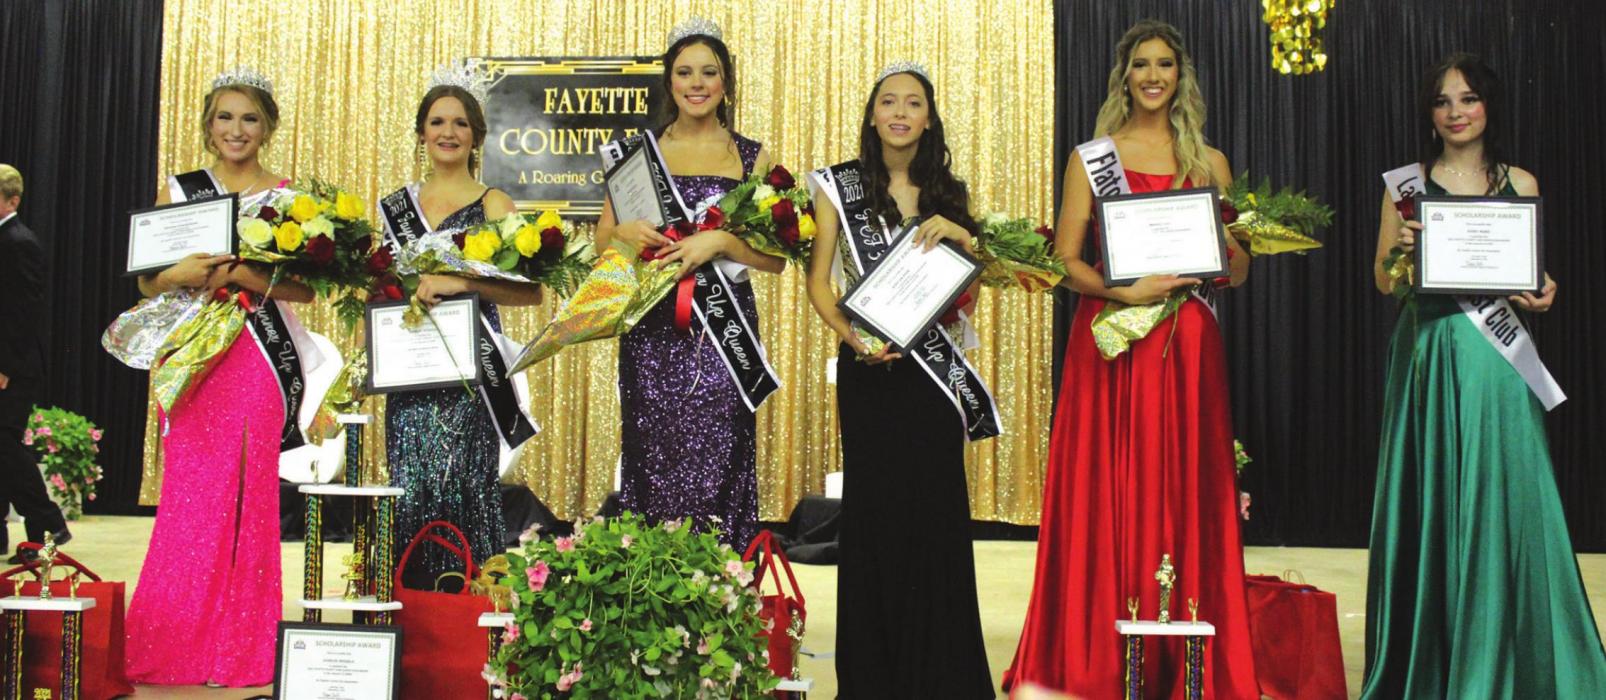 Left to right at the Queens Contest: First runner-up Brynna Stackhouse, 2021 Queen Charlee Wessels, Second runner-up Kayler Burnett, Third runner-up Rory Halpain, Braidy Fike and Avery Ward. Photo by Jeff Wick